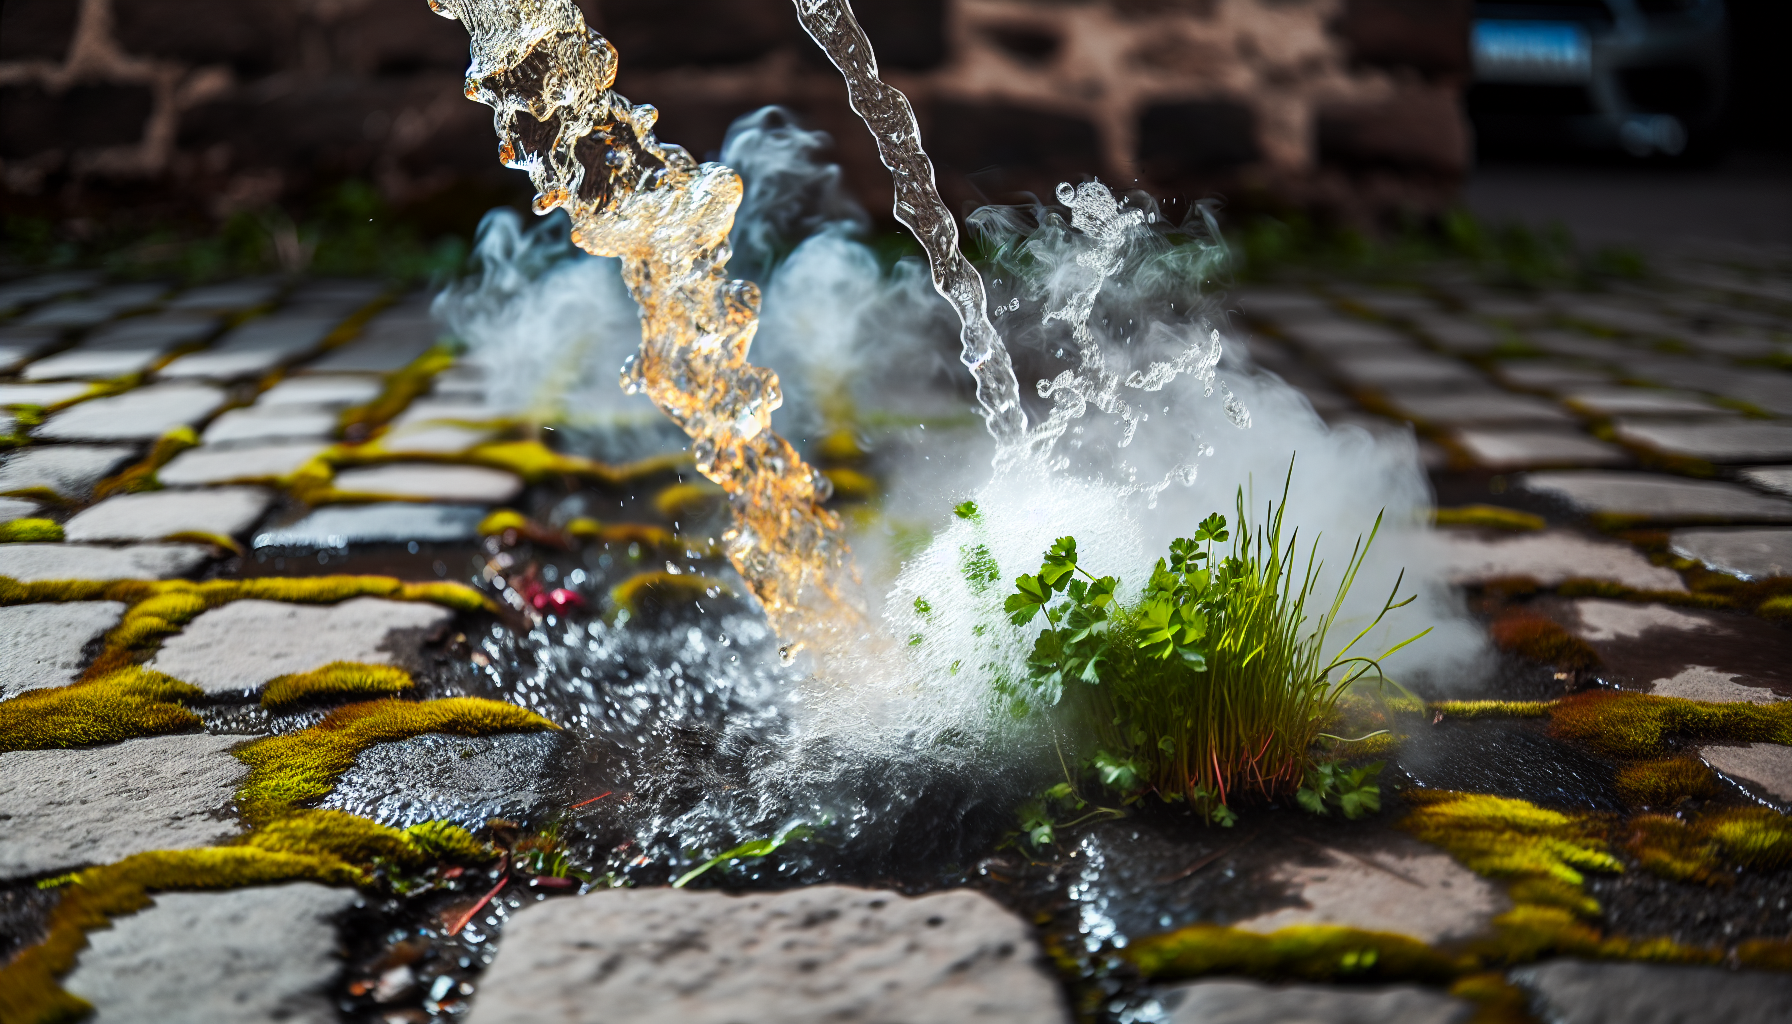 Boiling water being poured on weeds between pavers